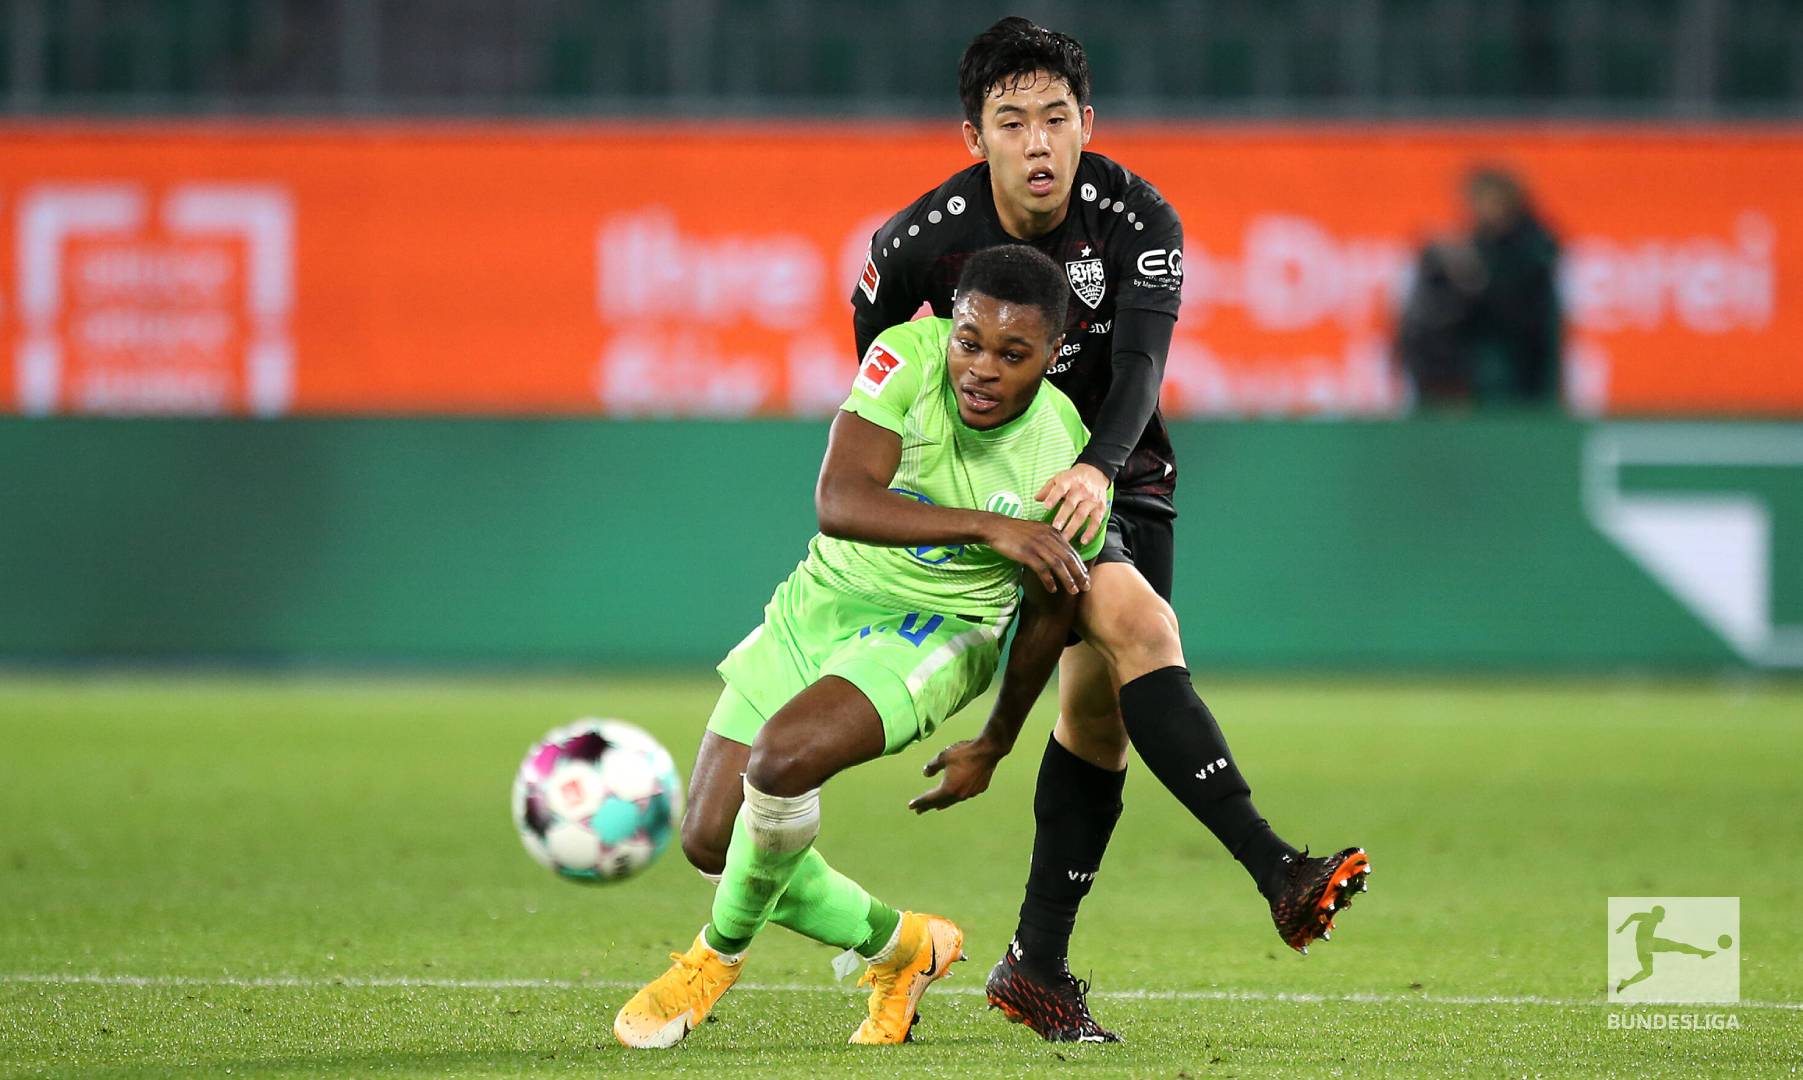 Bundesliga English Wataro Endo Has Won 212 Duels So Far This Season The Most Of Any Player In The League And A Whole 34 More Than Second Place